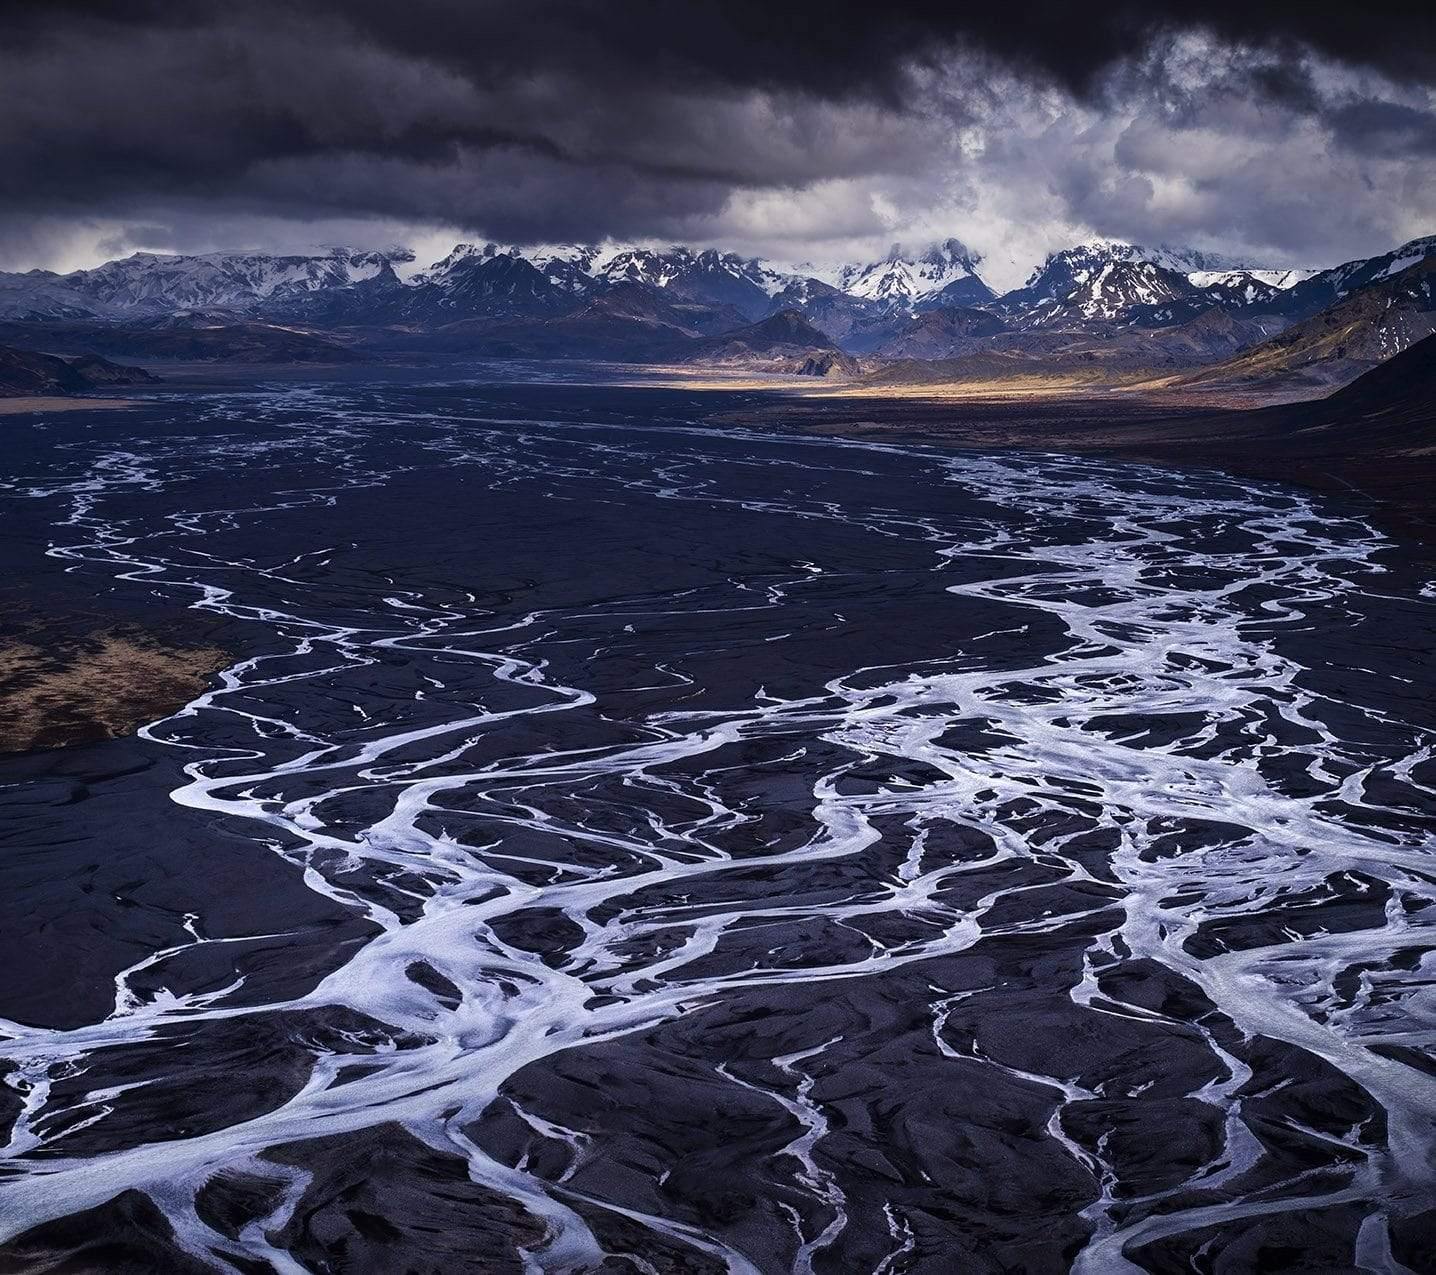 Black and white zig-zag lines and corves on the land with some high mountains with the peak covered with snow, dark stormy clouds over the picture, Glacial Melt